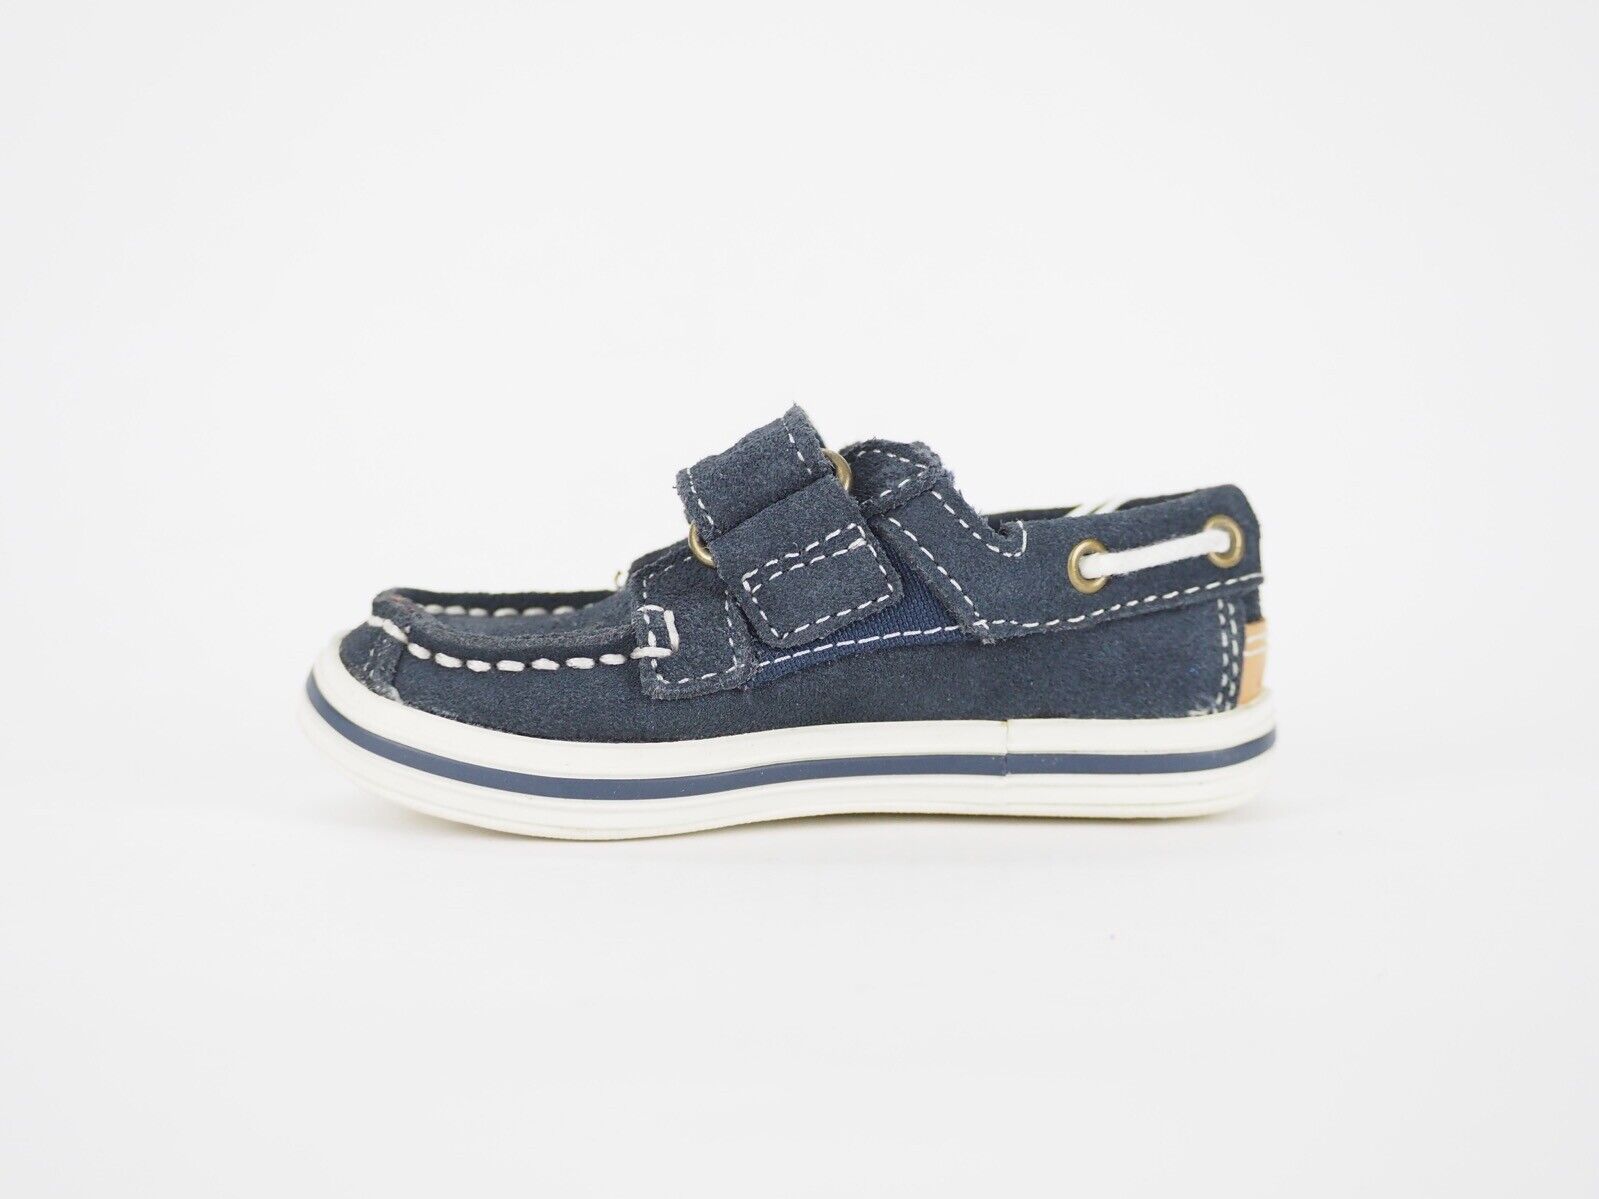 Boys Timberland Casco Bay 4387R Navy Blue Leather Casual Toddlers Boat Shoes - London Top Style